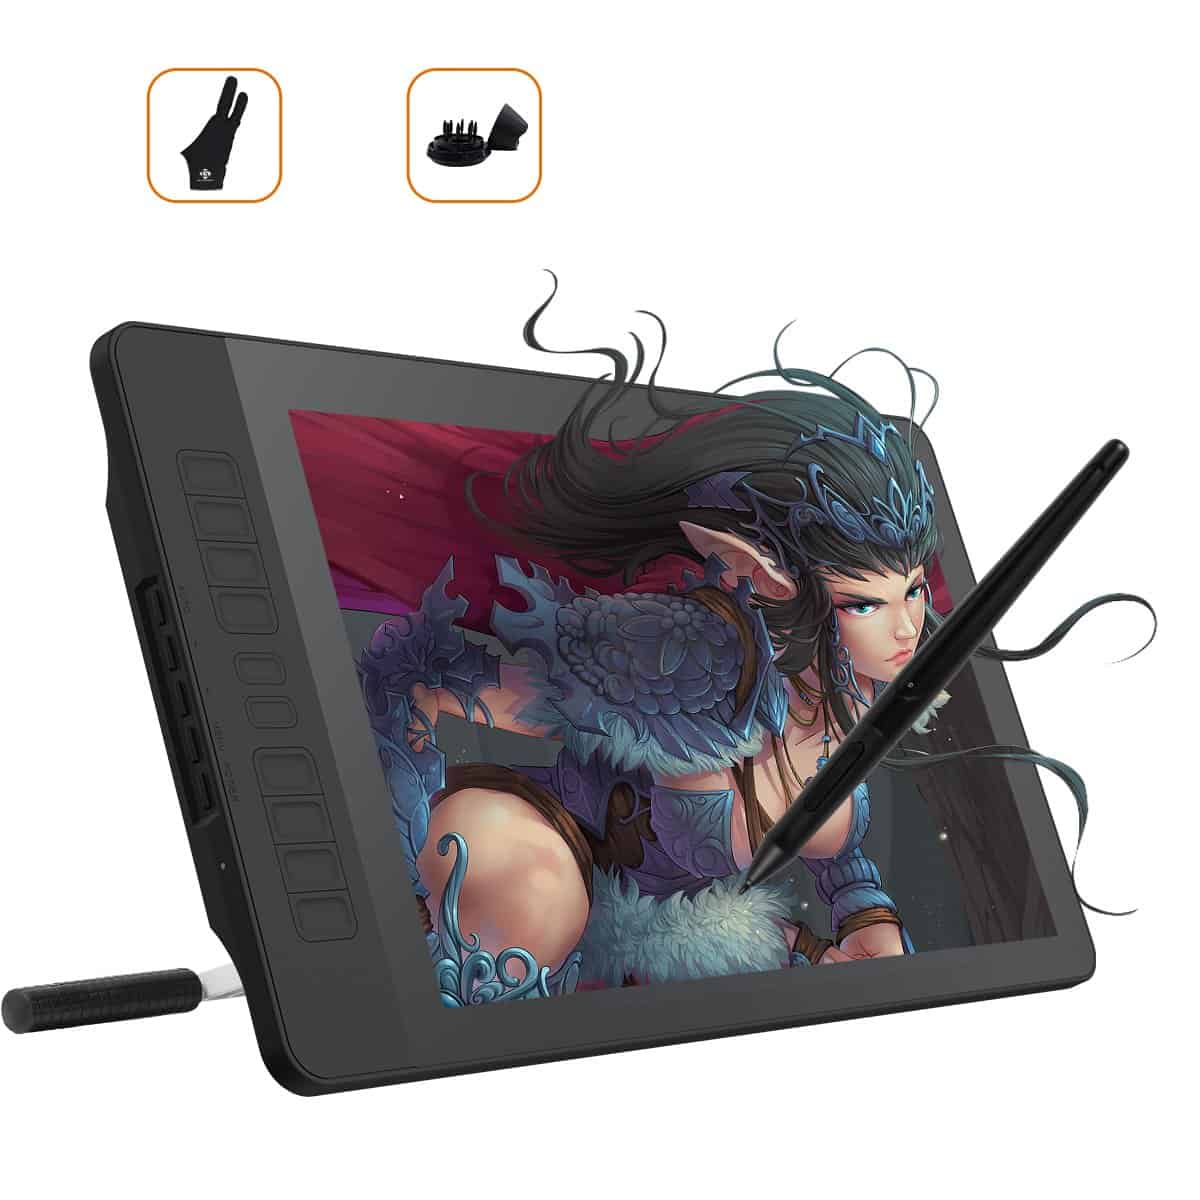 GAOMON PD1560 15.6 Inches 8192 Levels Pen Display with Arm Stand 1920 x 1080 HD IPS Screen Drawing Tablet